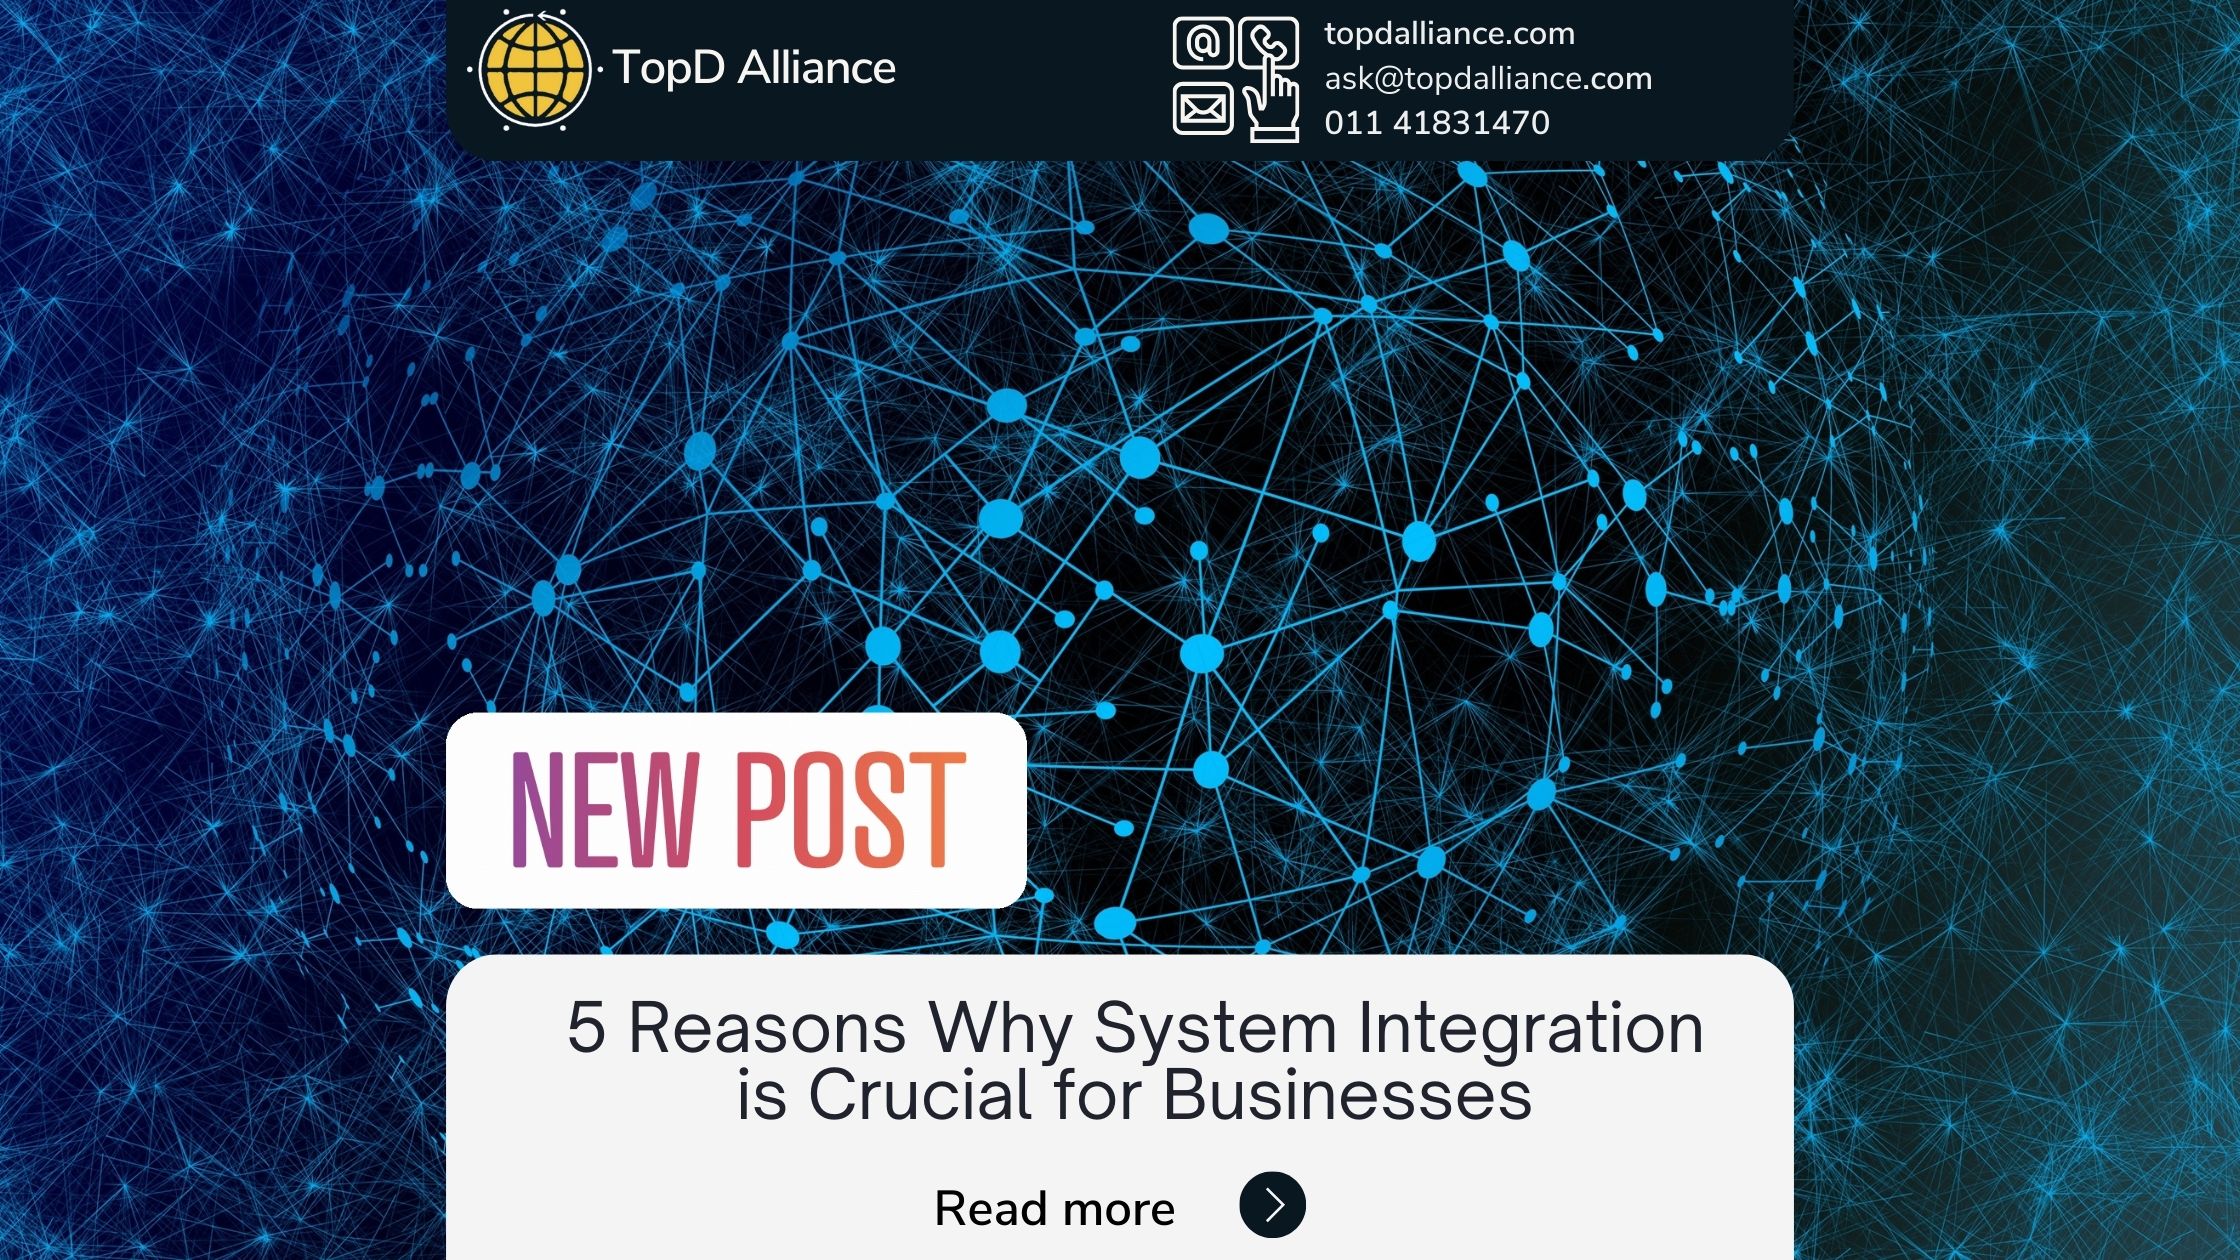 5 Reasons Why System Integration is Crucial for Businesses